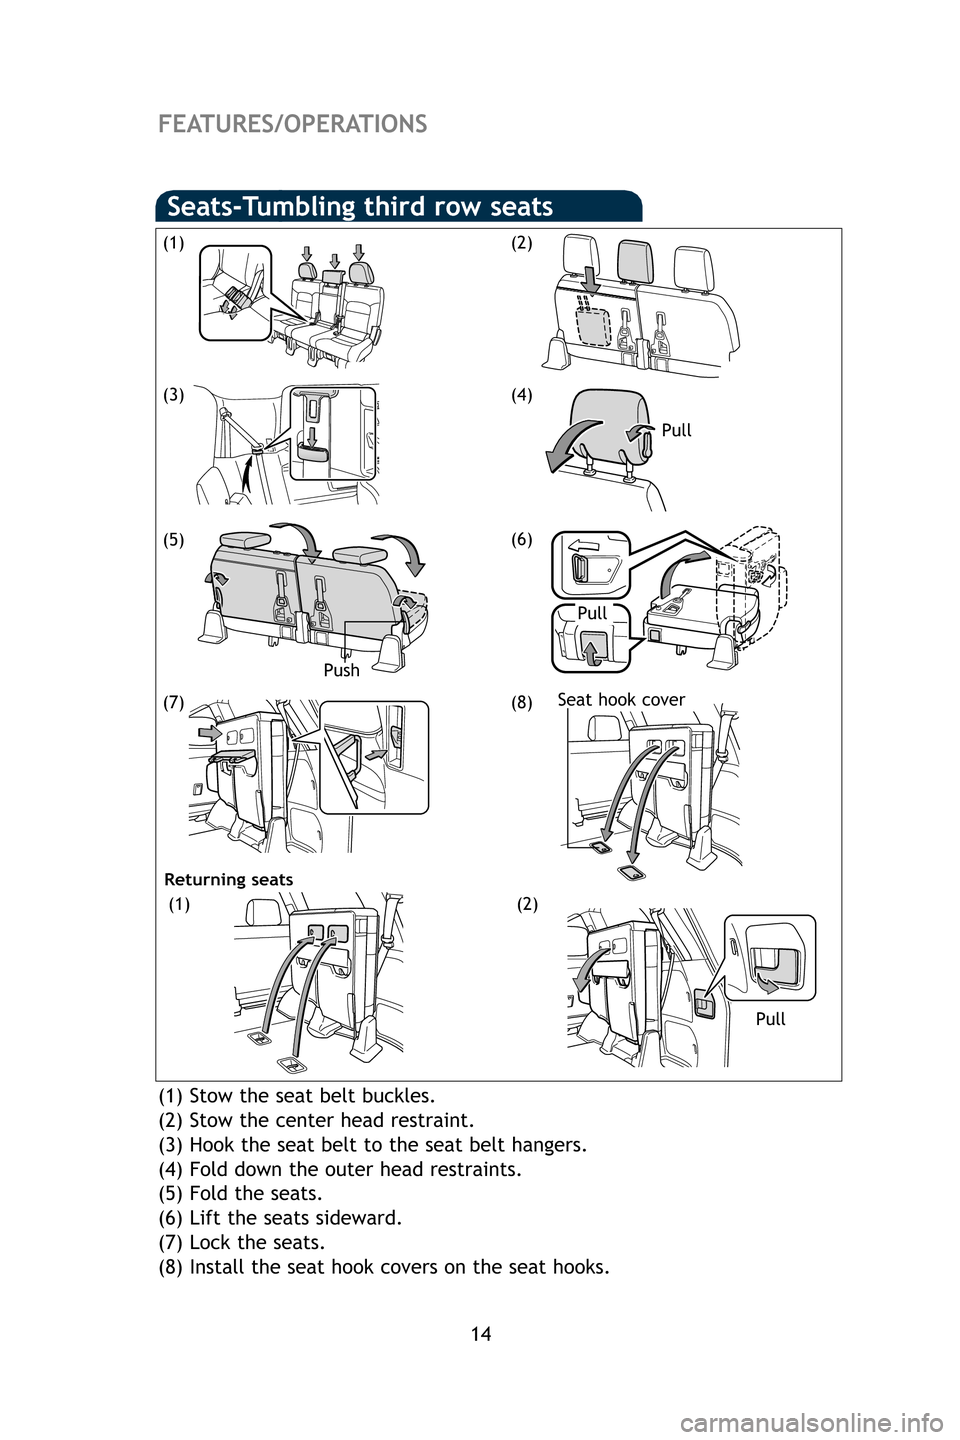 TOYOTA LAND CRUISER 2009 J200 Quick Reference Guide 14
FEATURES/OPERATIONS
(1) Stow the seat belt buckles.
(2) Stow the center head restraint.
(3) Hook the seat belt to the seat belt hangers.
(4) Fold down the outer head restraints.
(5) Fold the seats.